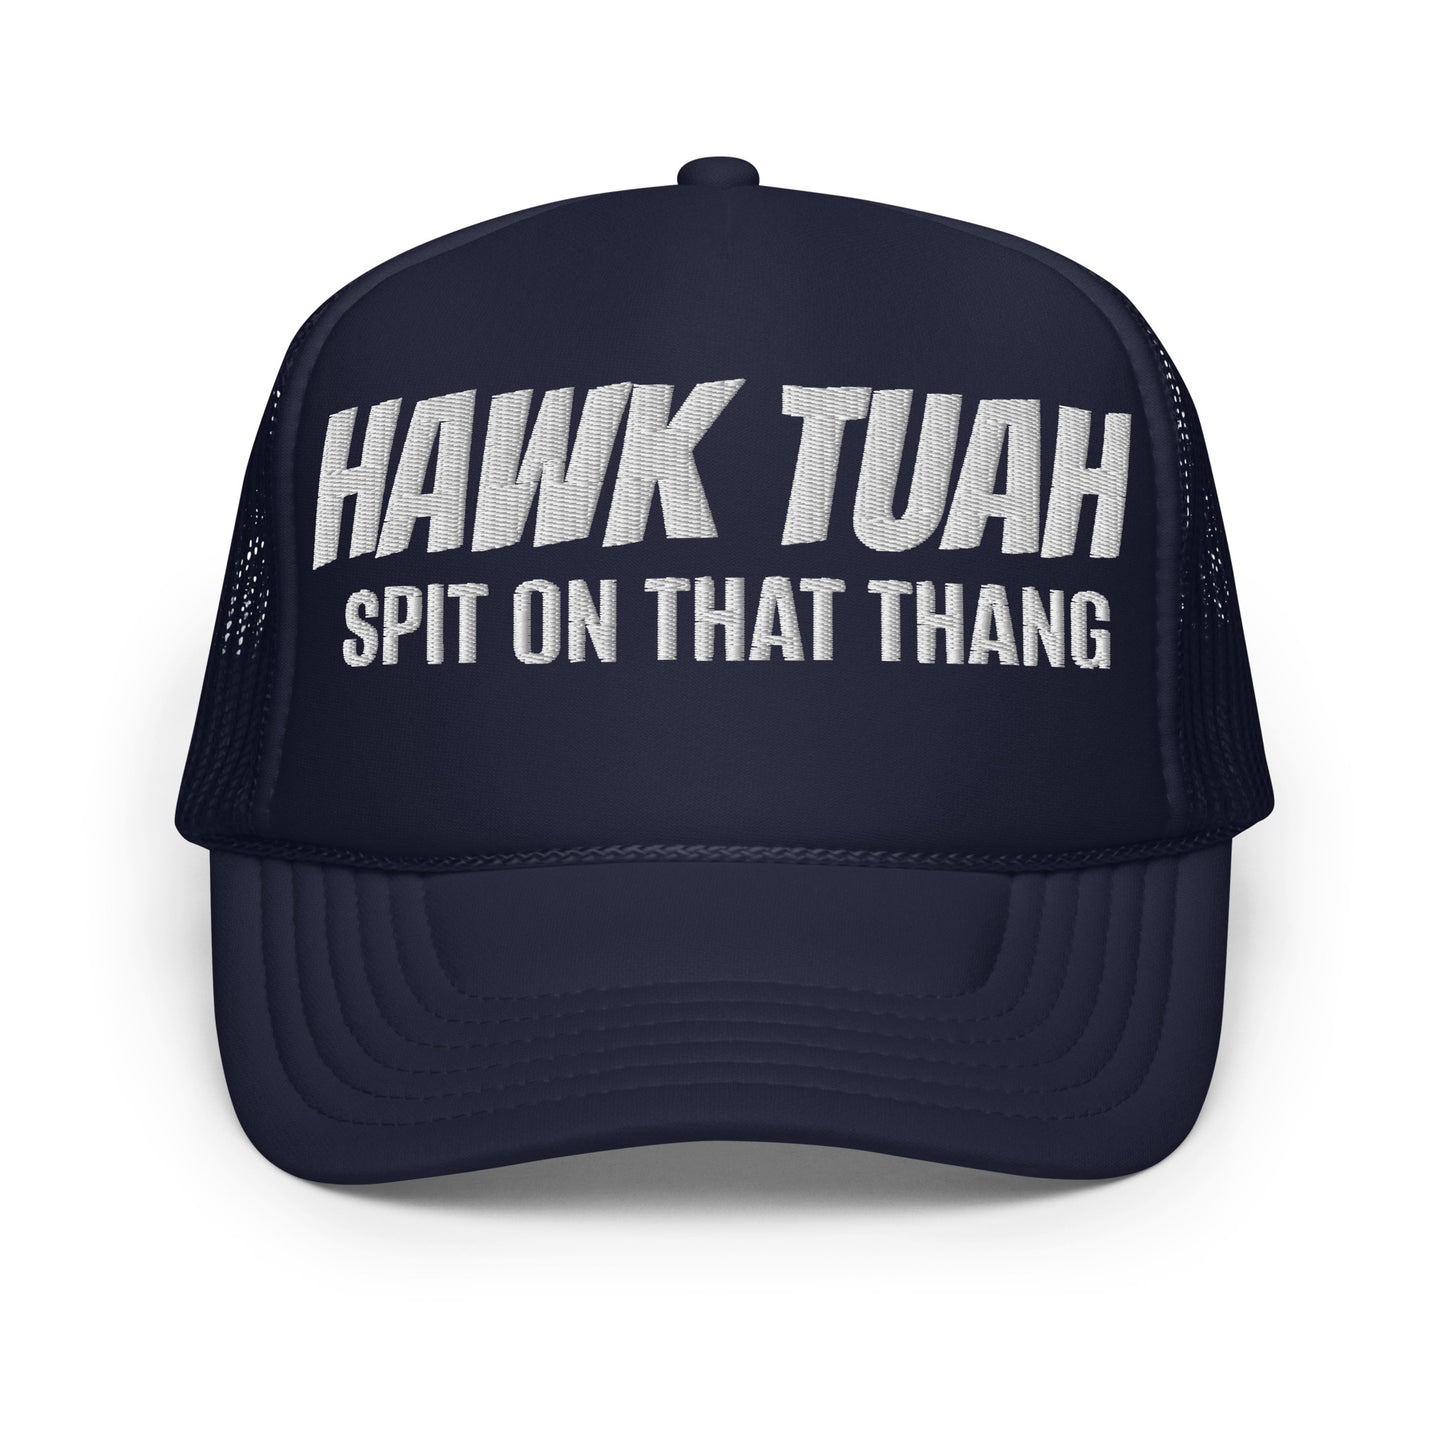 Hawk Tuah Solid Color Unisex Embroidered Foam Trucker Hat